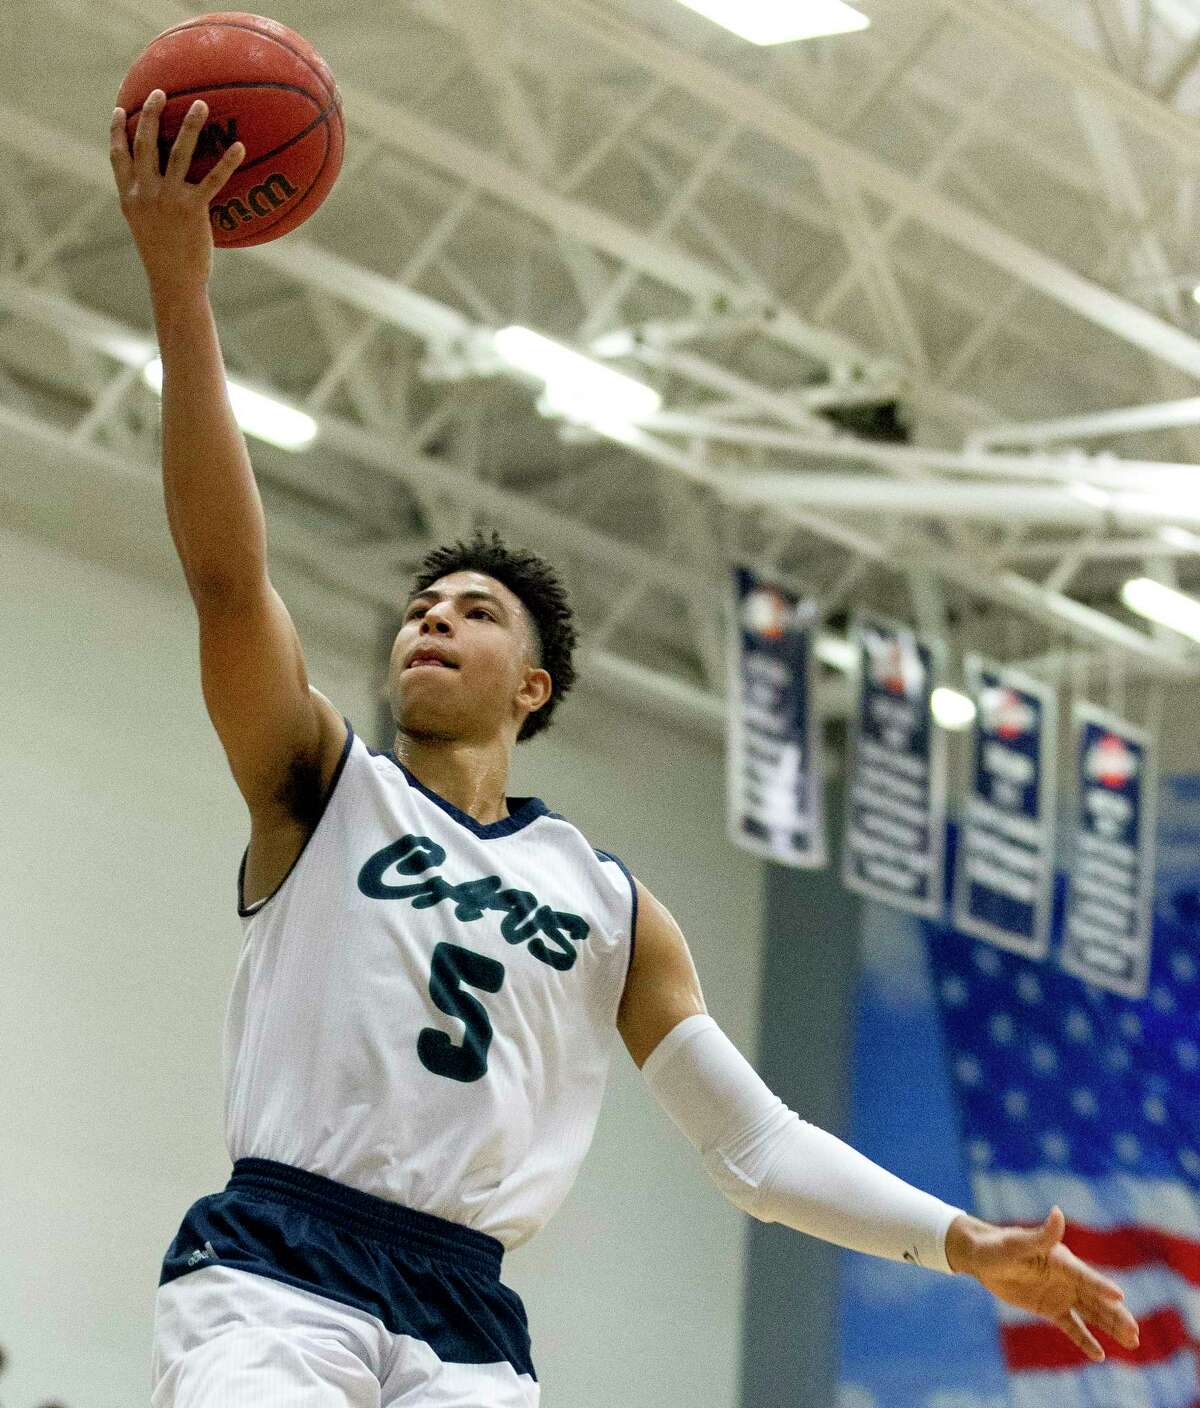 Next up for College Park's Quentin Grimes is trying to beat The Woodlands for the first time Friday night.